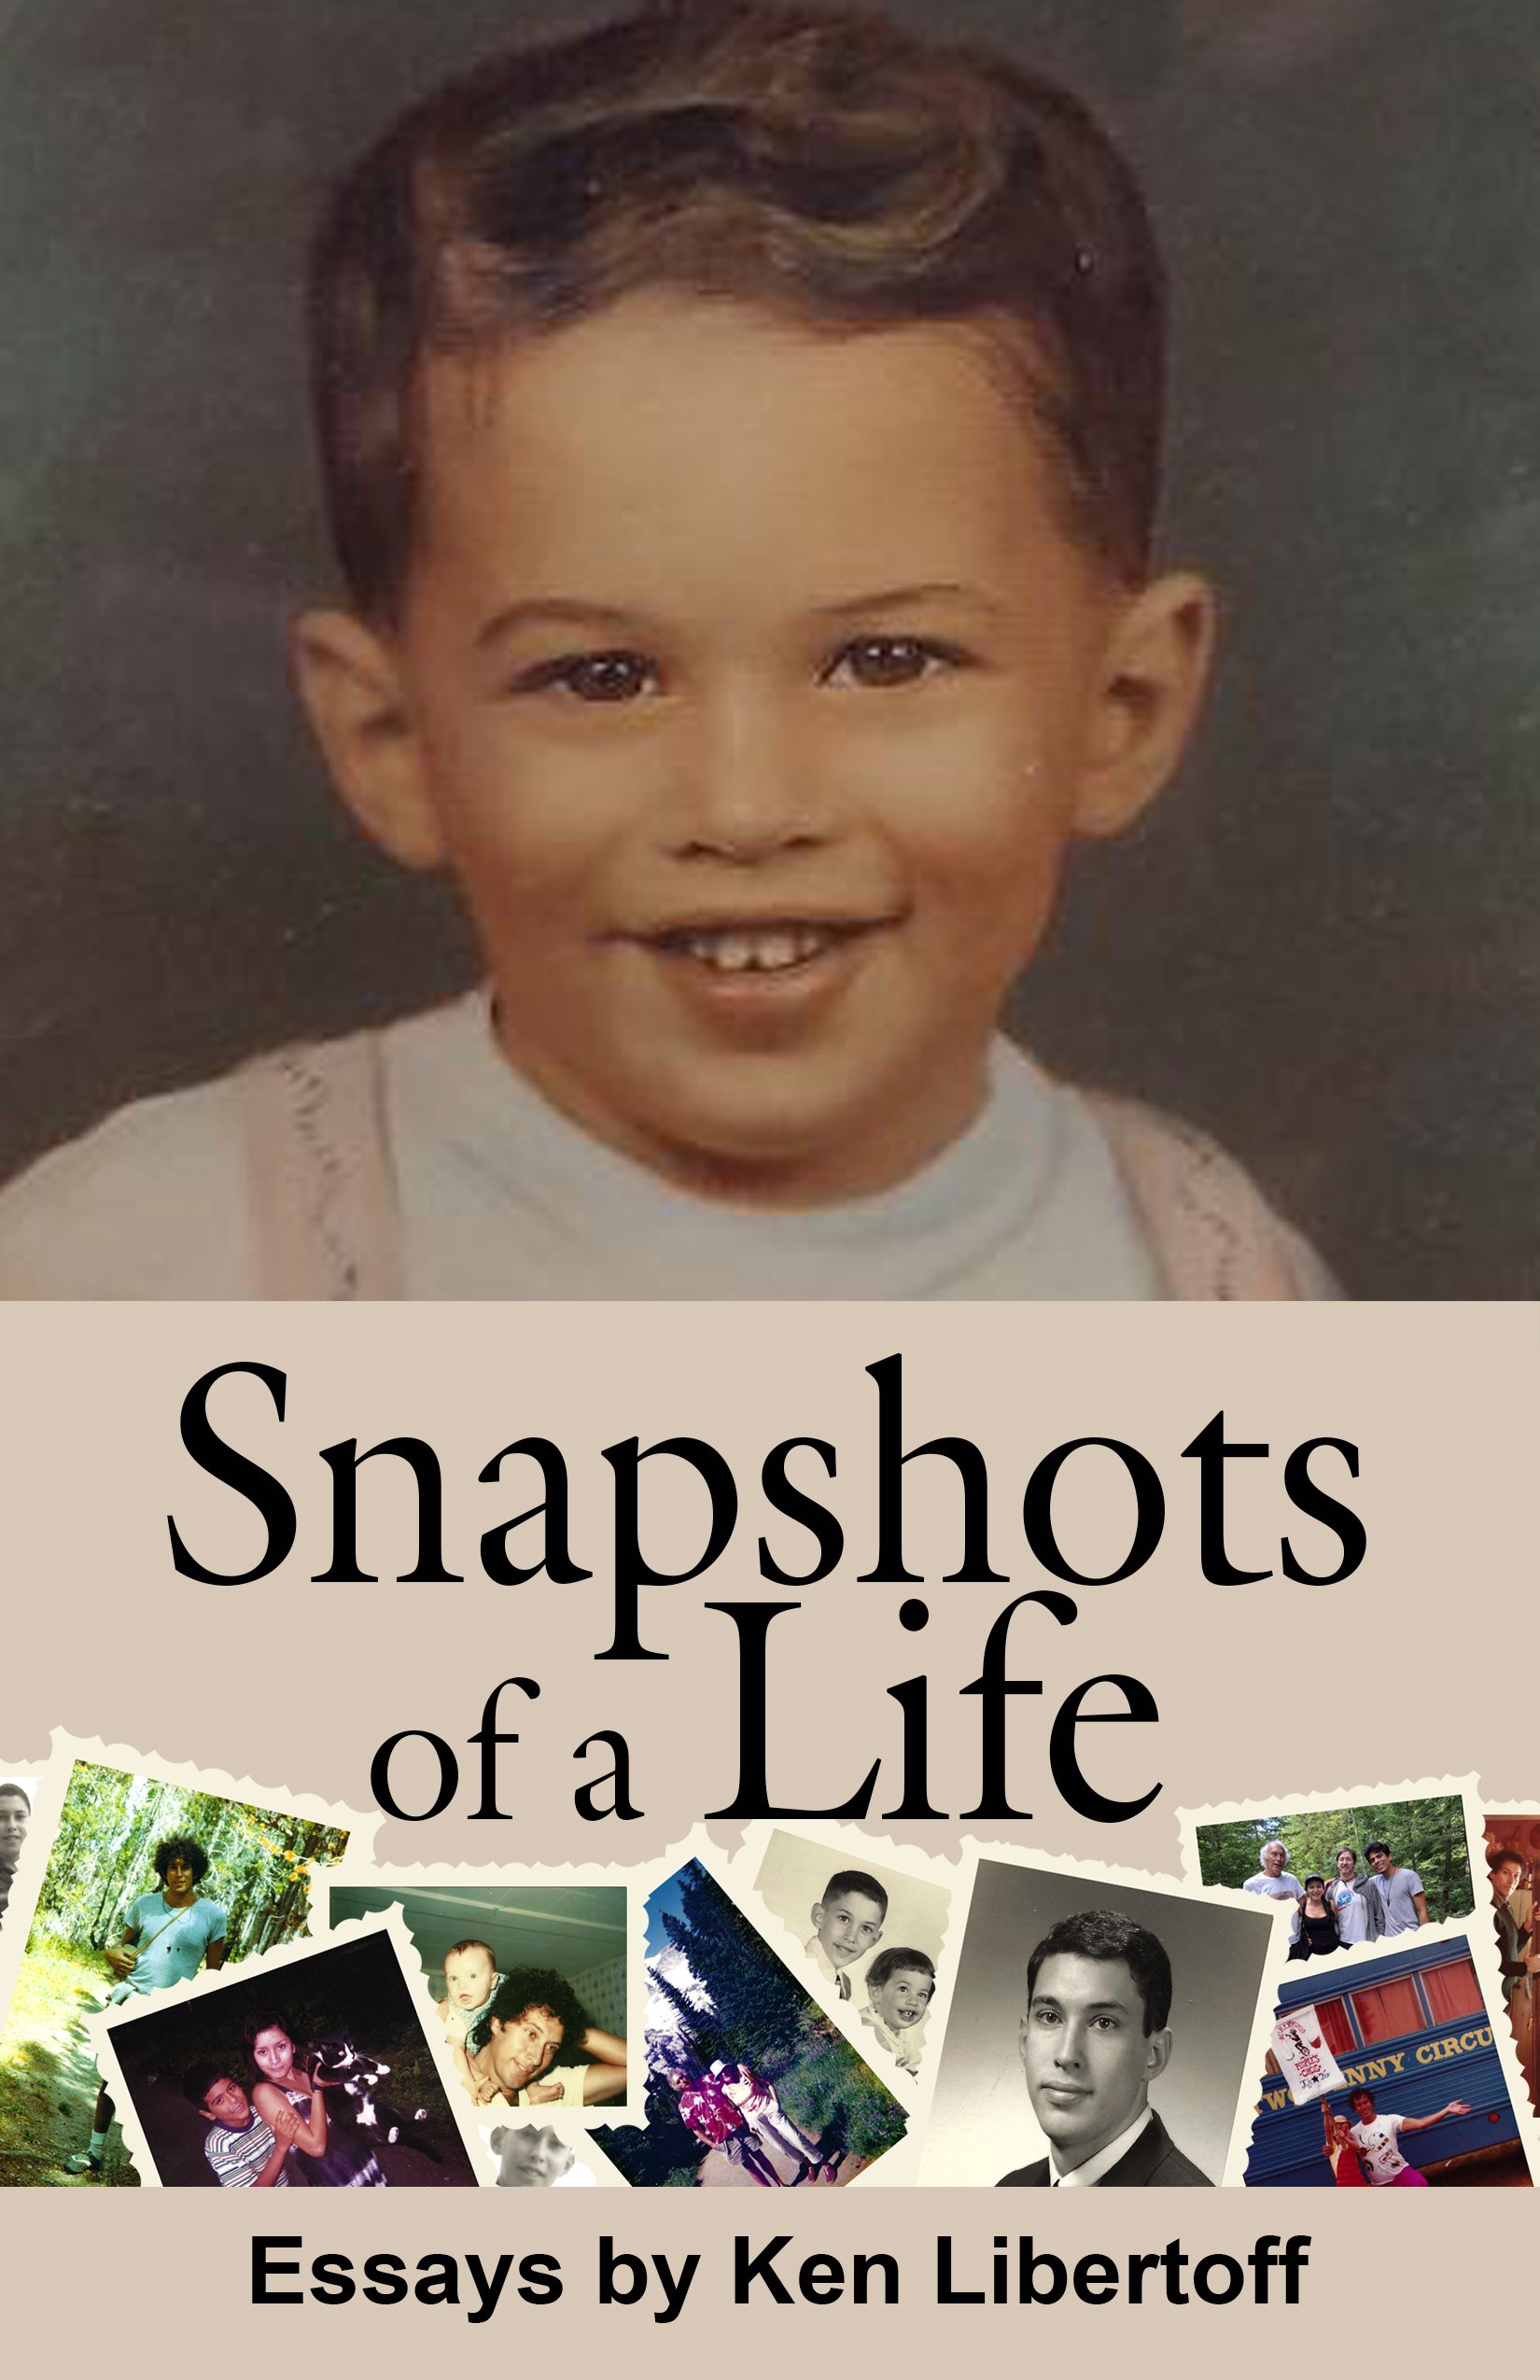 You can find it on  searching for “Snapshots of Our Life